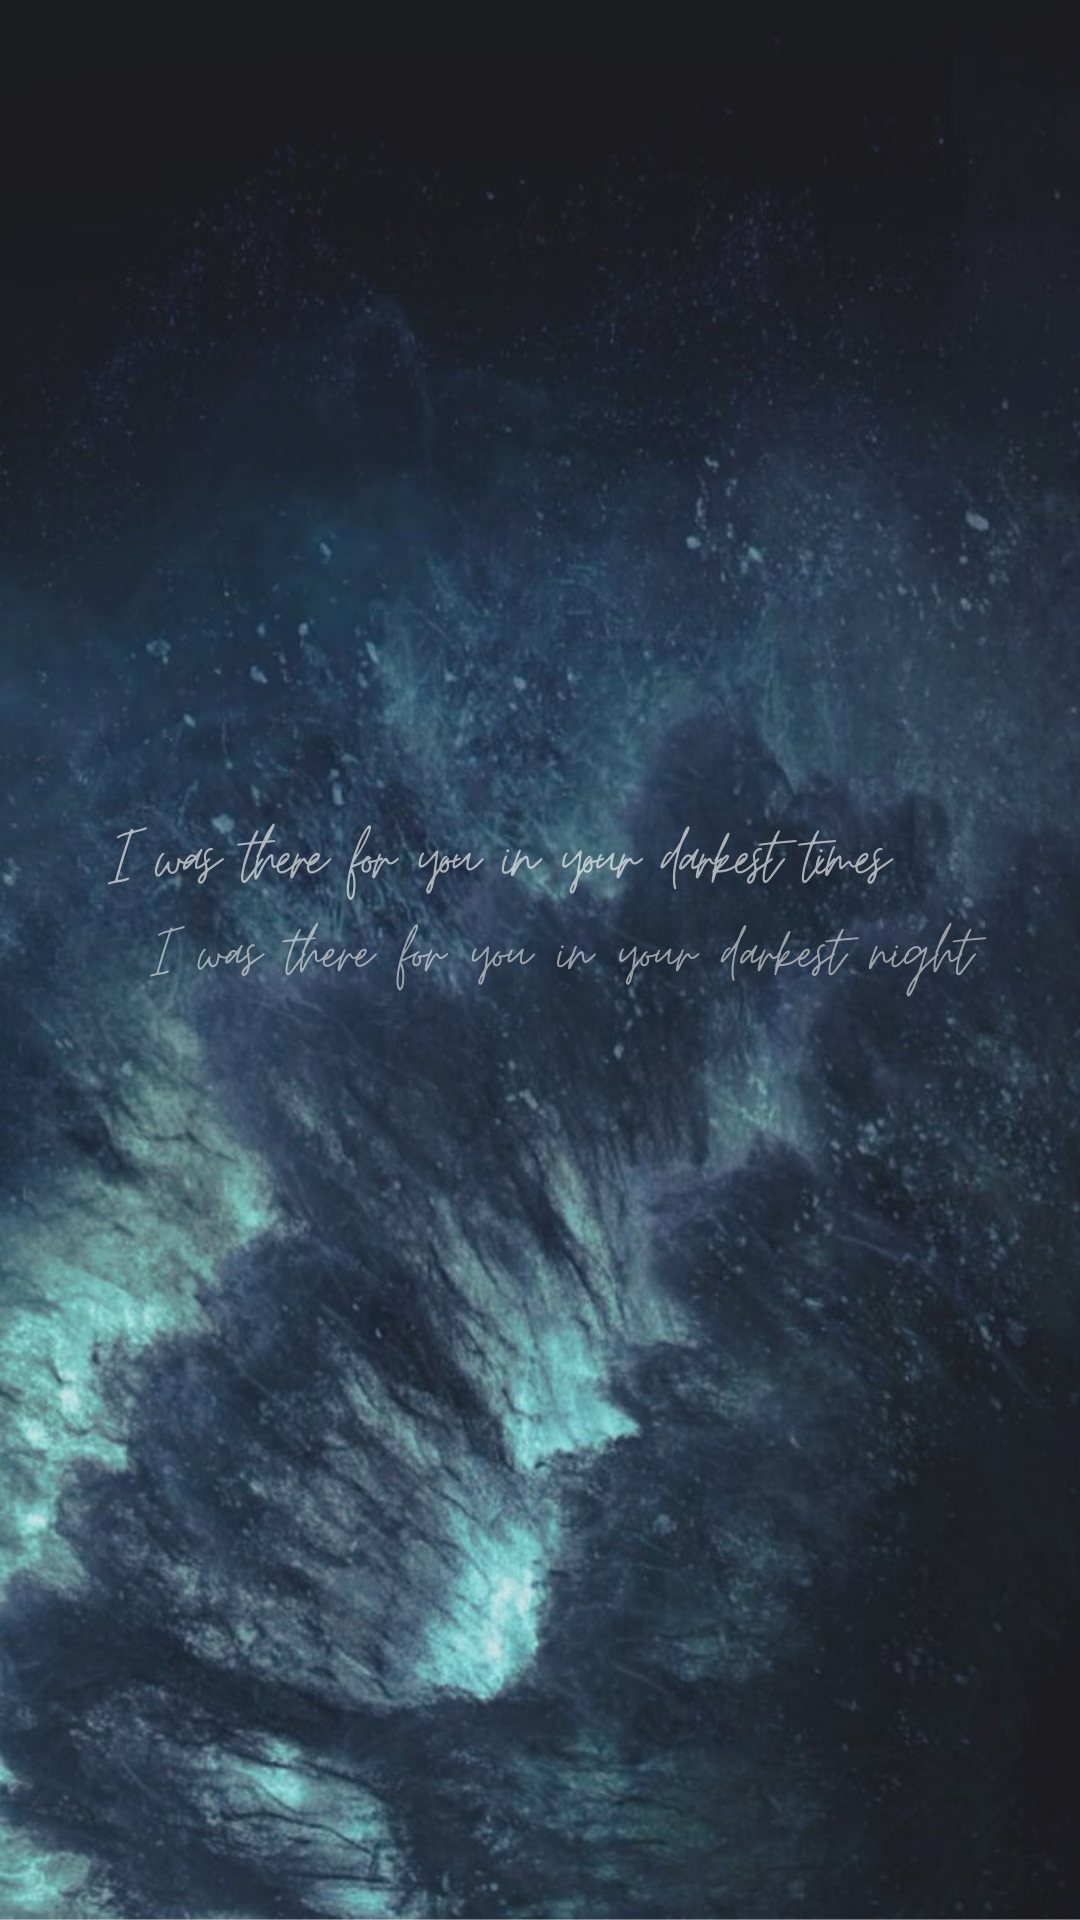 I was there for you in your darkest times lyrics